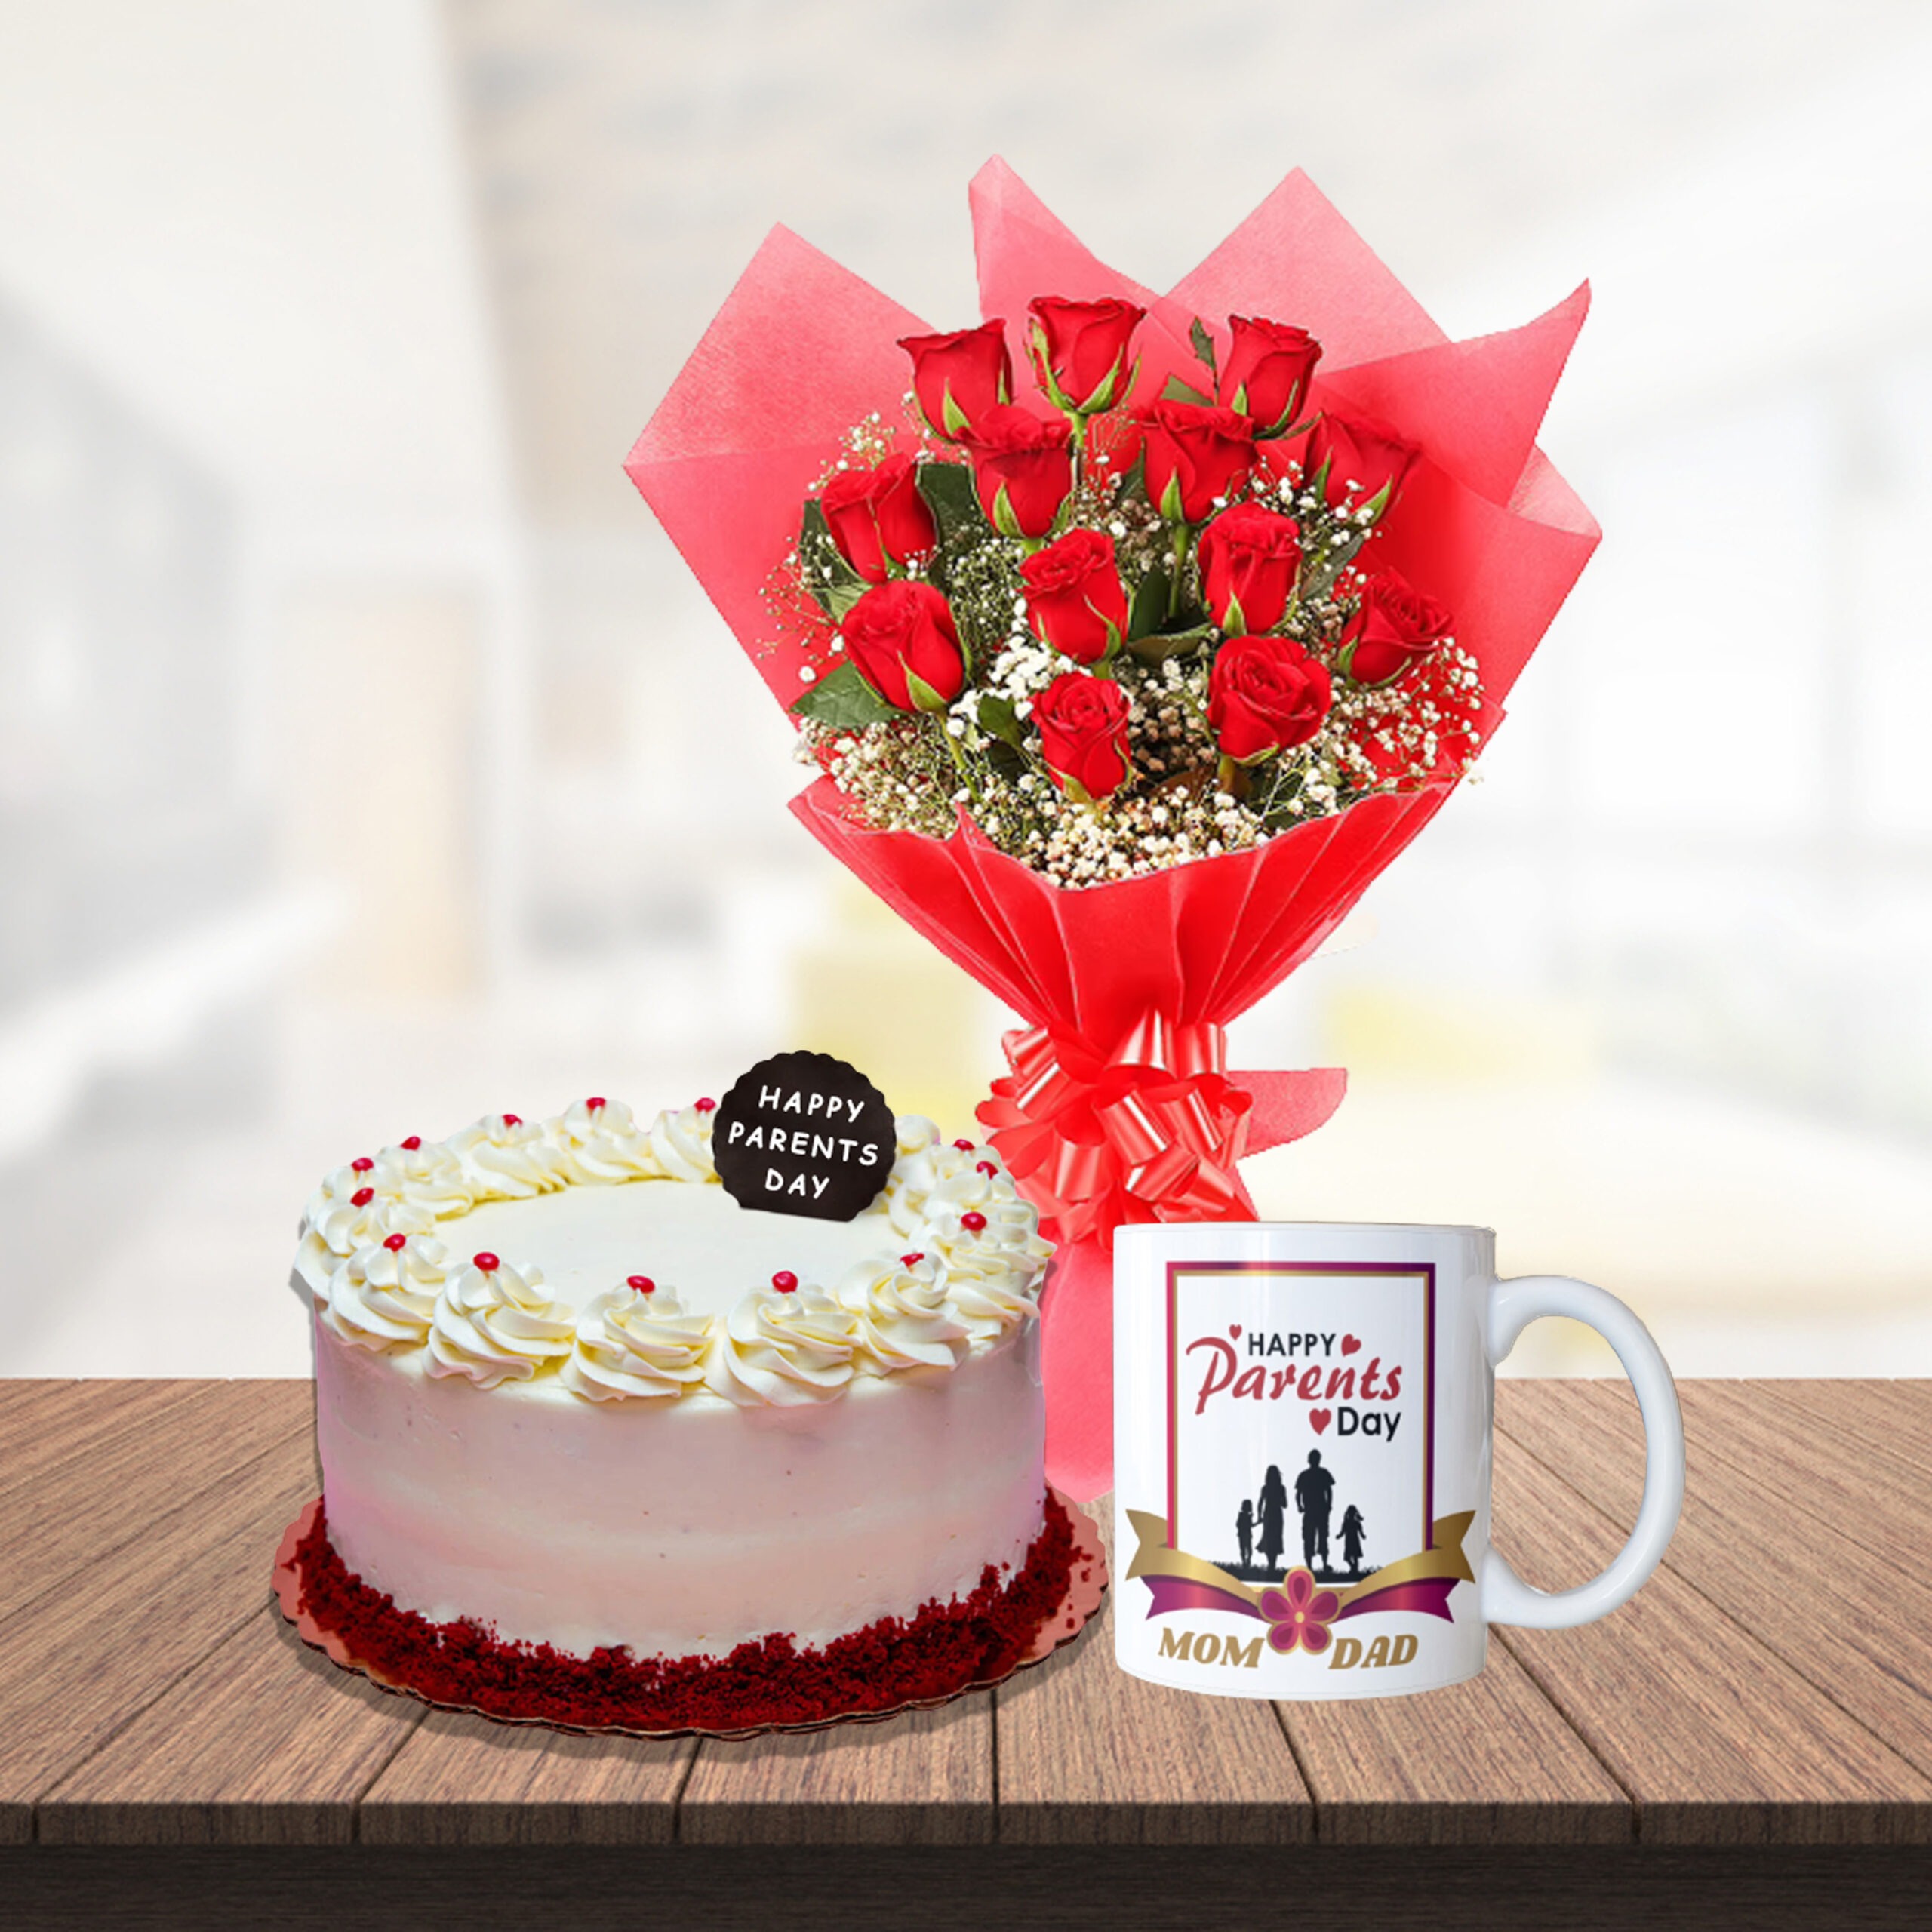 Make Your Parents Feel Special on Parents Day with Cake Delivery